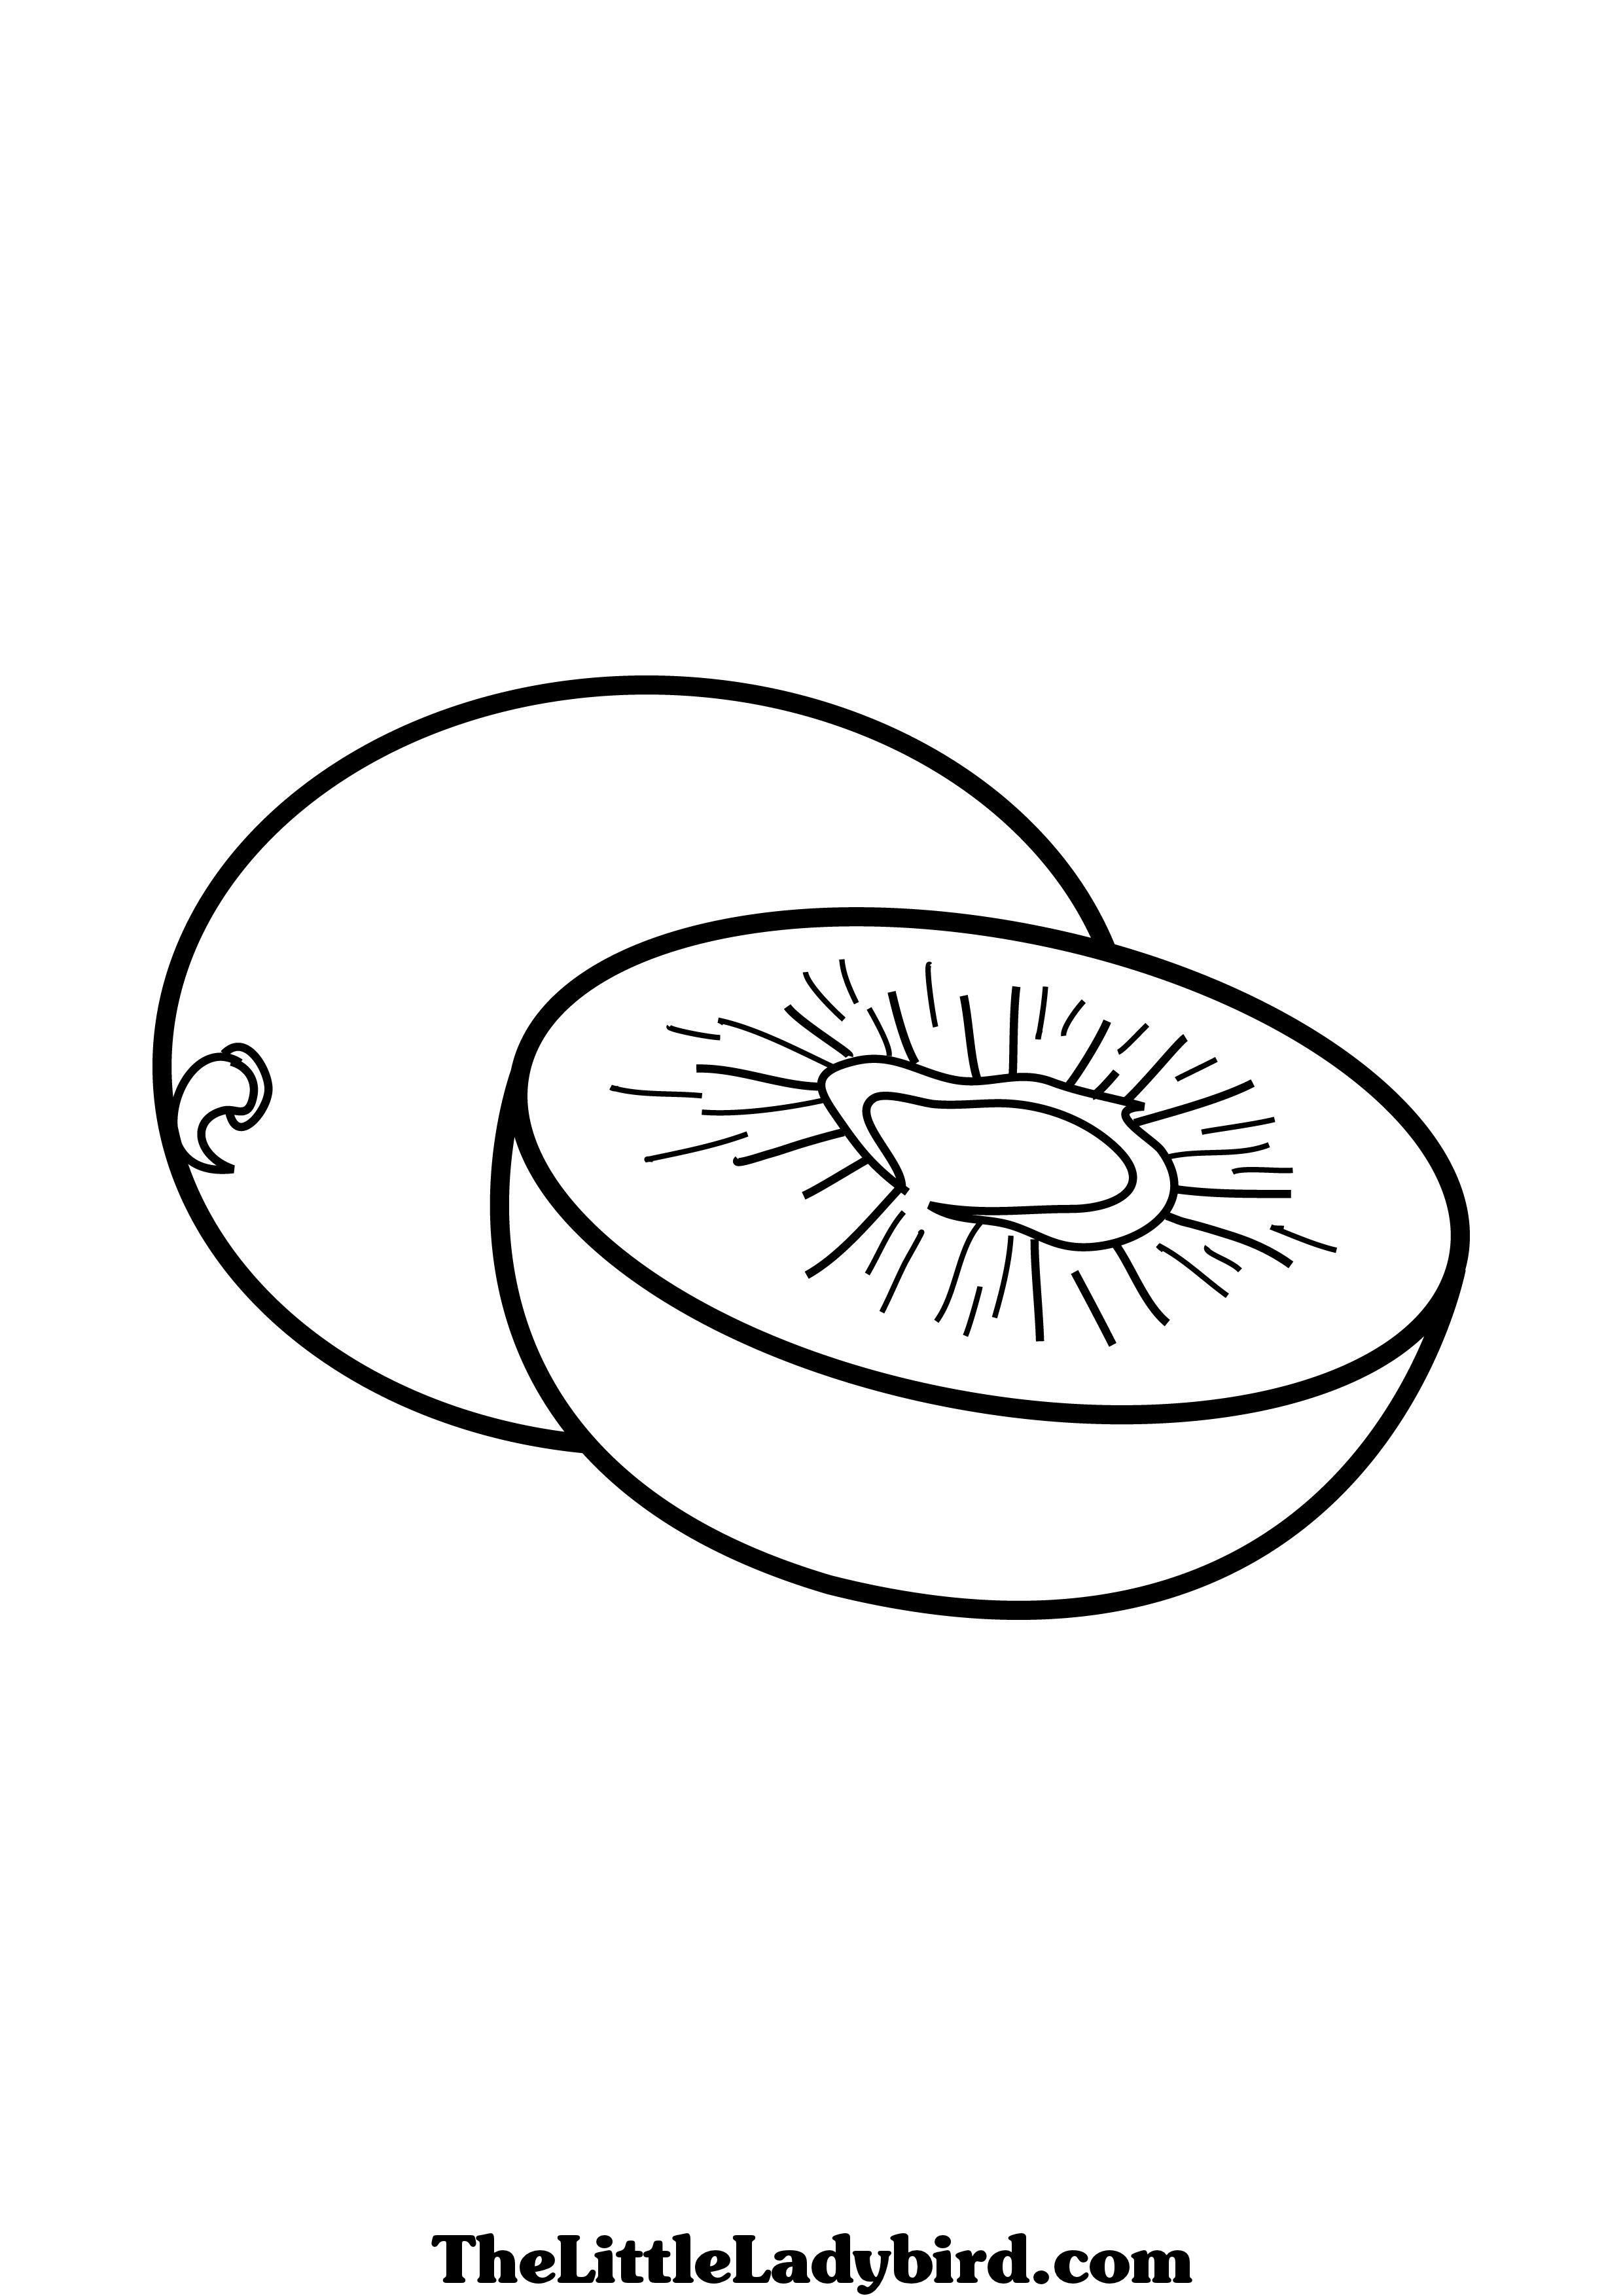 Kiwi Fruit Coloring Coloring Pages